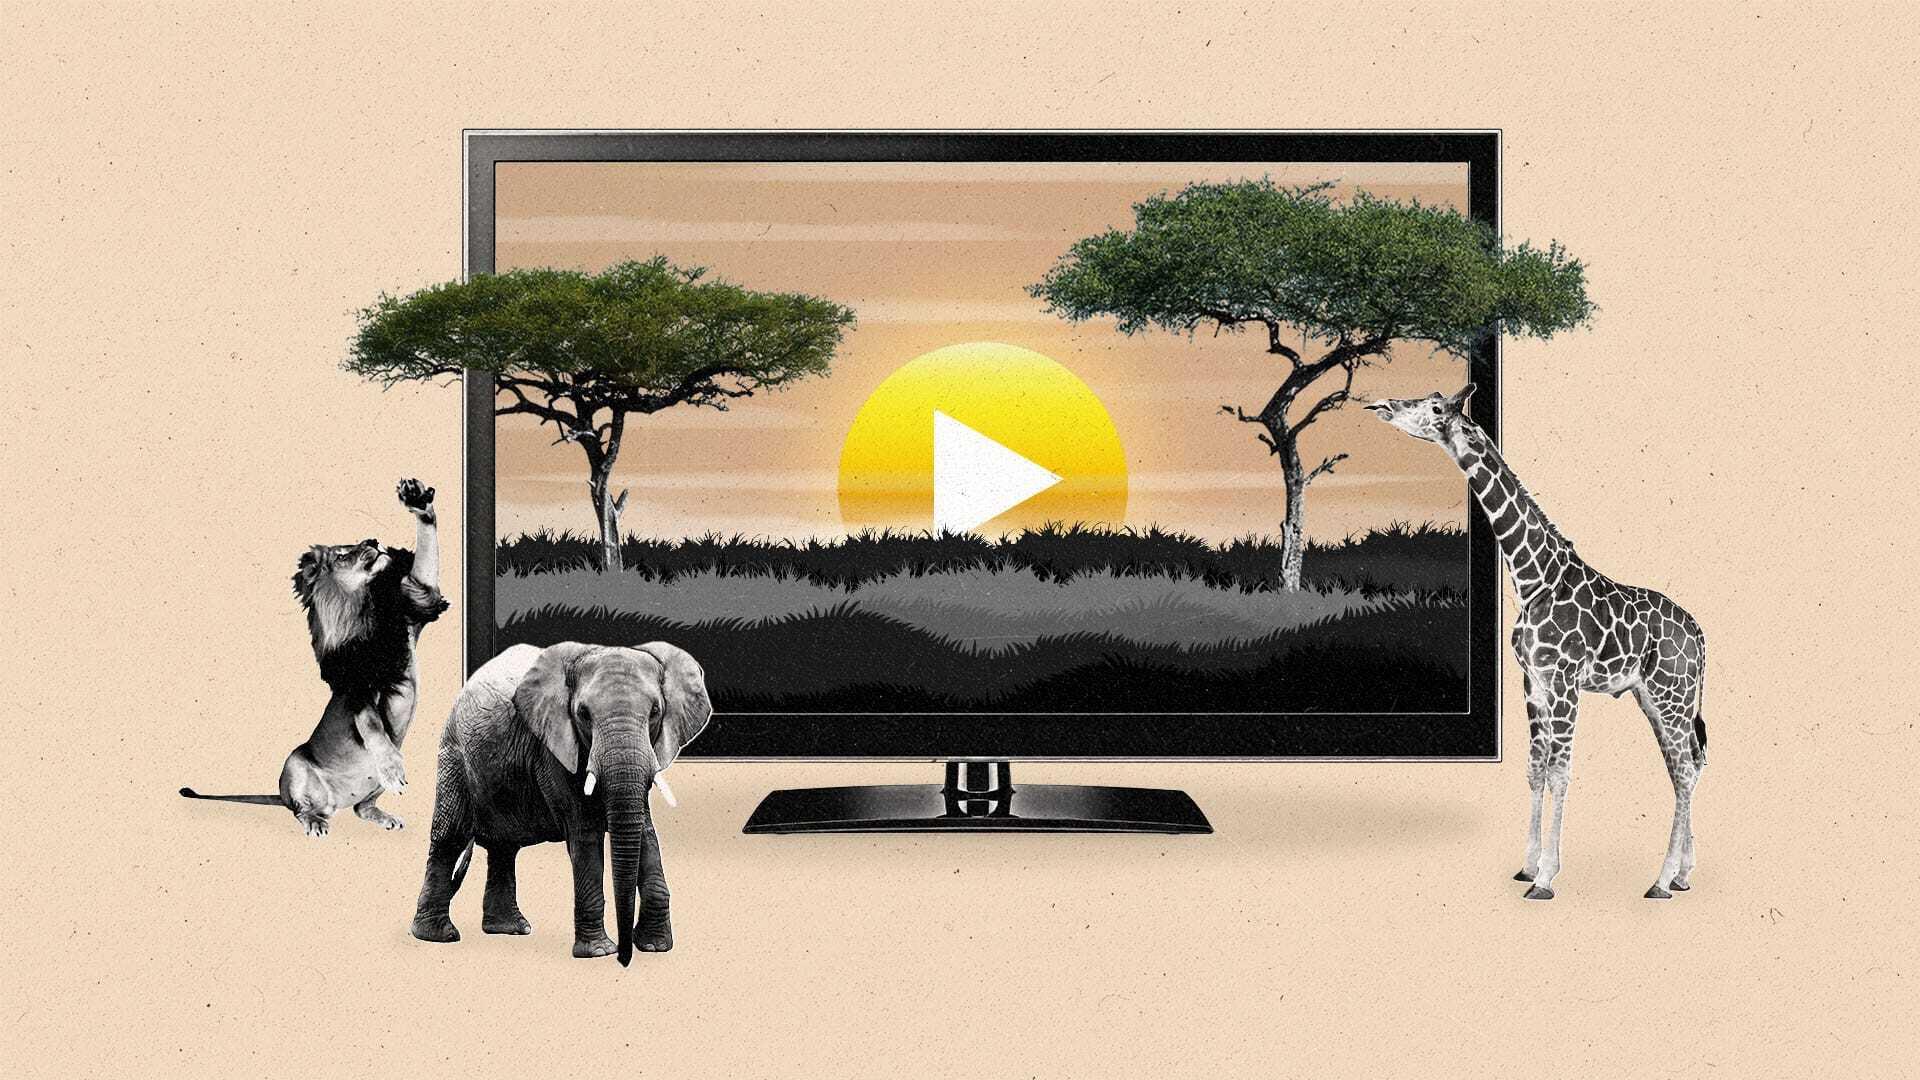 A play button appears on the rising sun above an African savannah on a connected TV as animals interact with it.